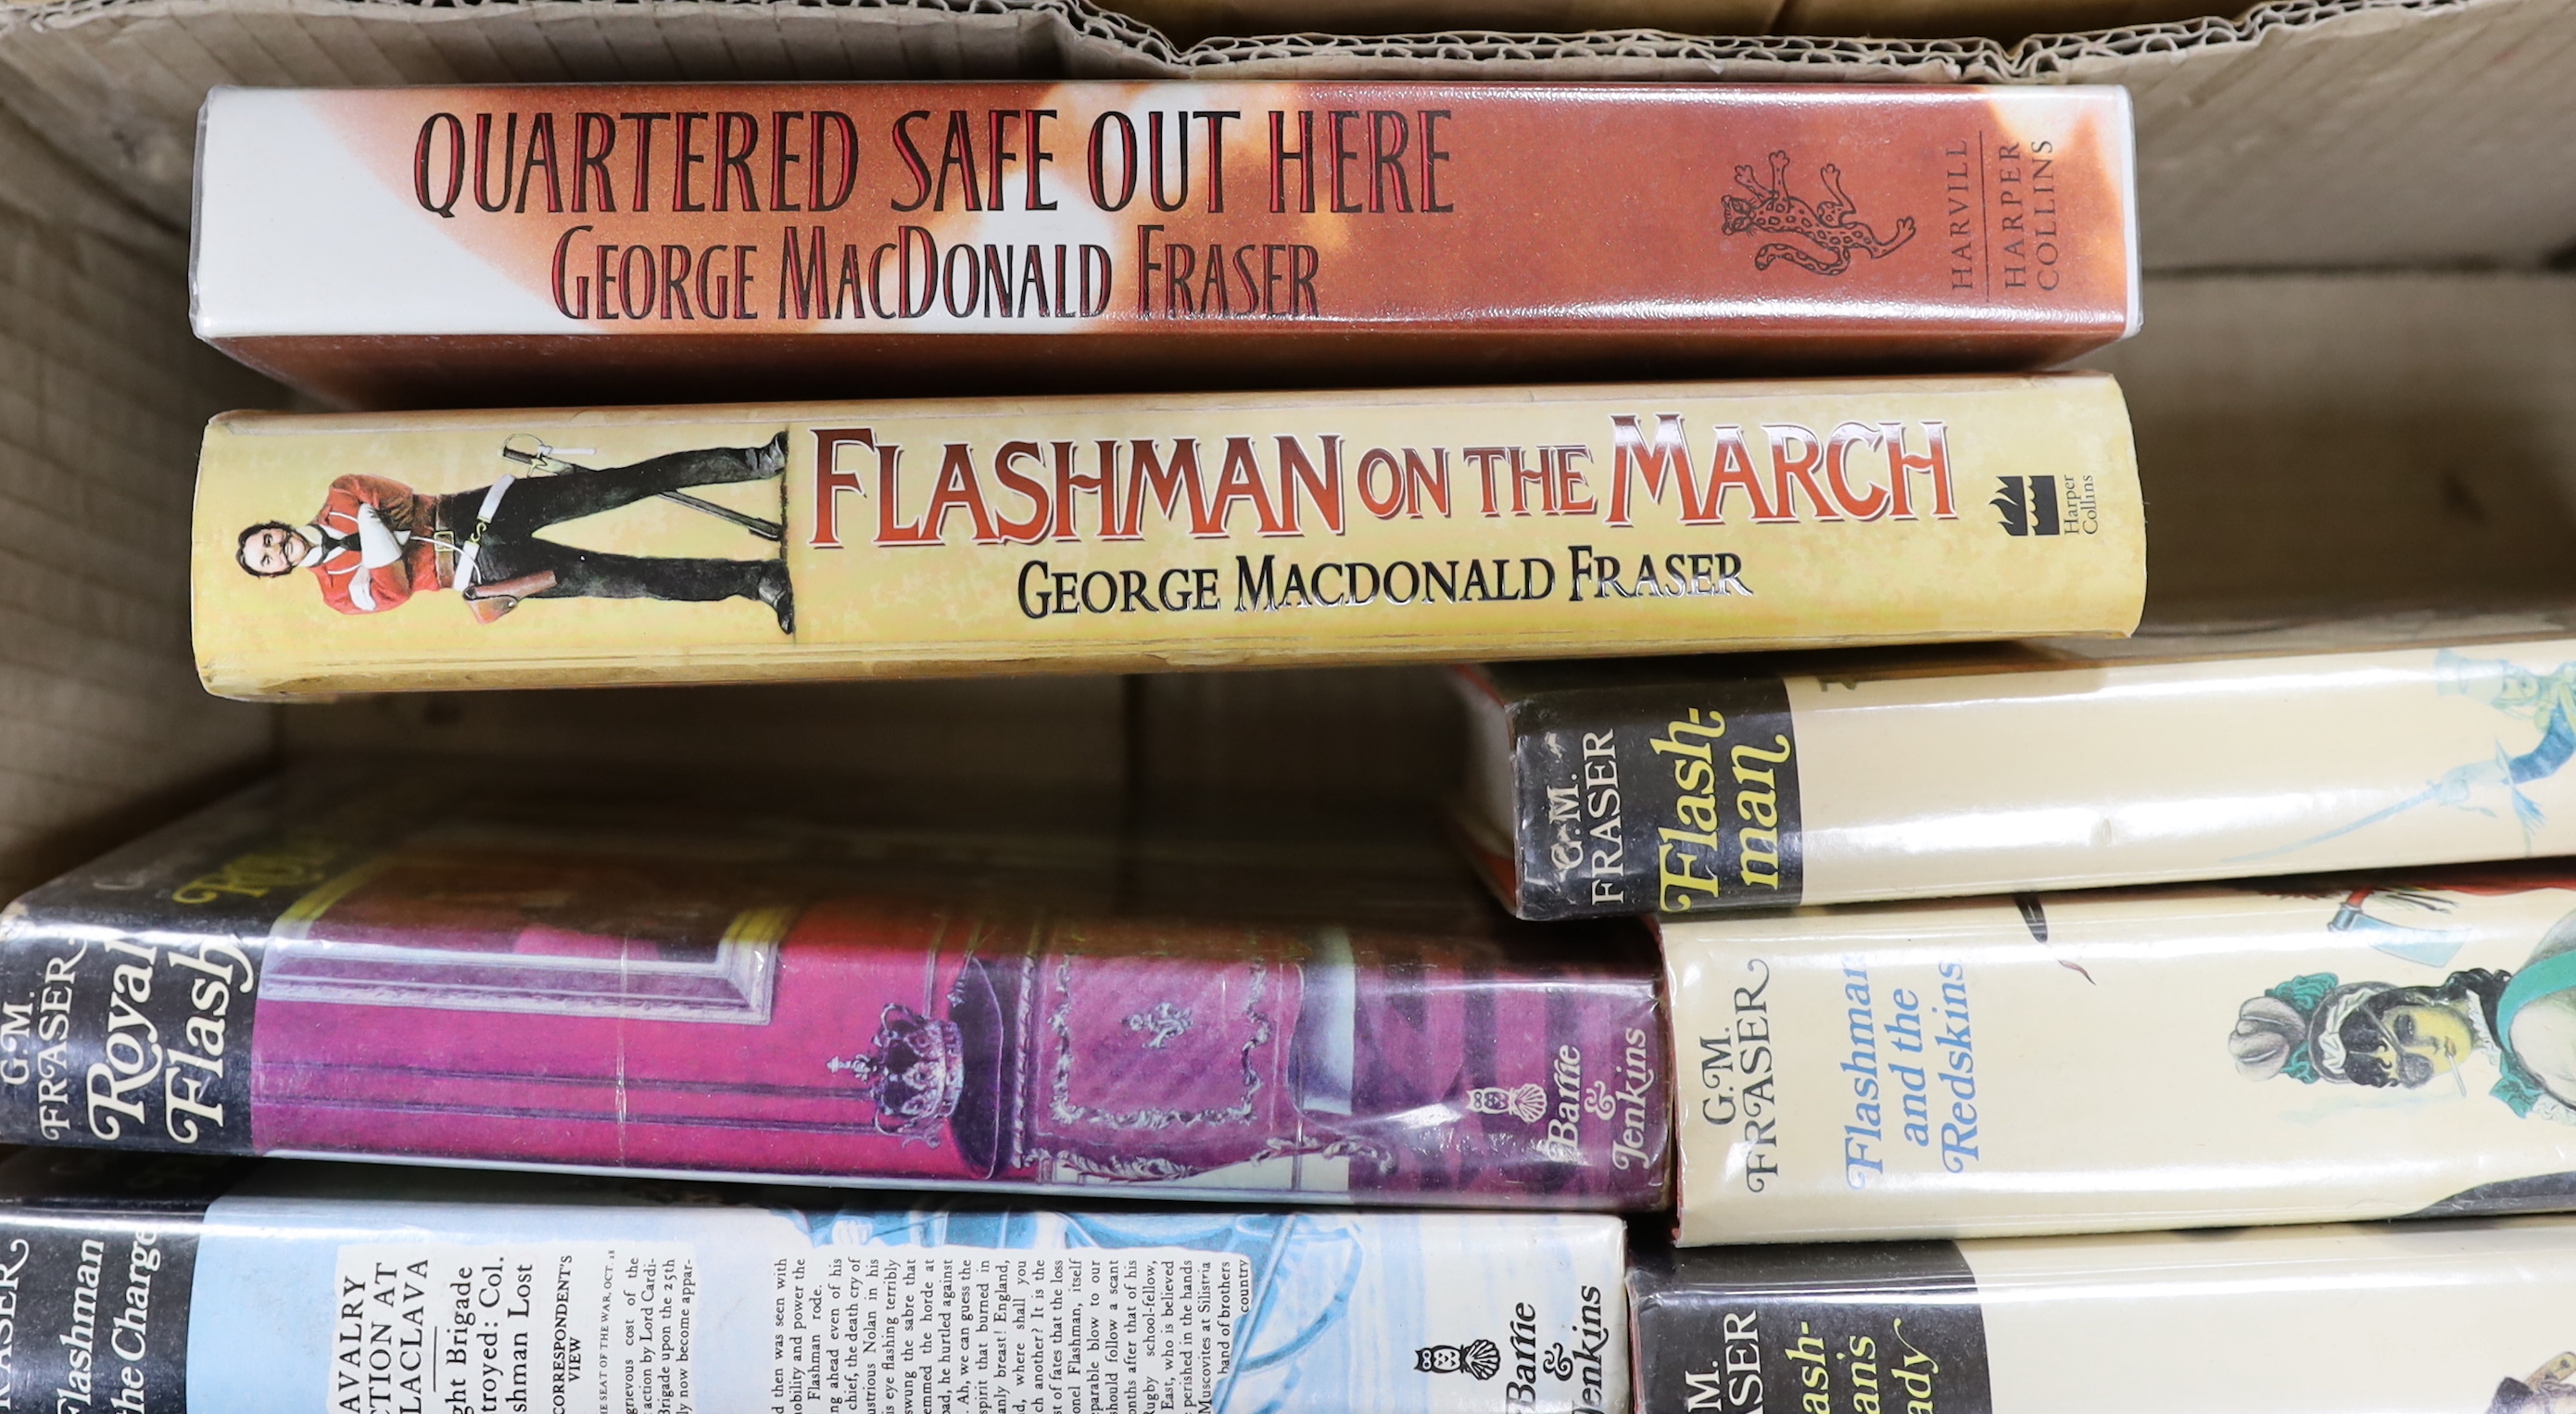 Fraser, George MacDonald - A complete set of The Flashman Papers, all 1st editions, all with dust jackets, consisting:- Flashman, 1969; Royal Flash, 1970; Flash for Freedom, 1971; Flashman at the Charge, 1973; Flashman a